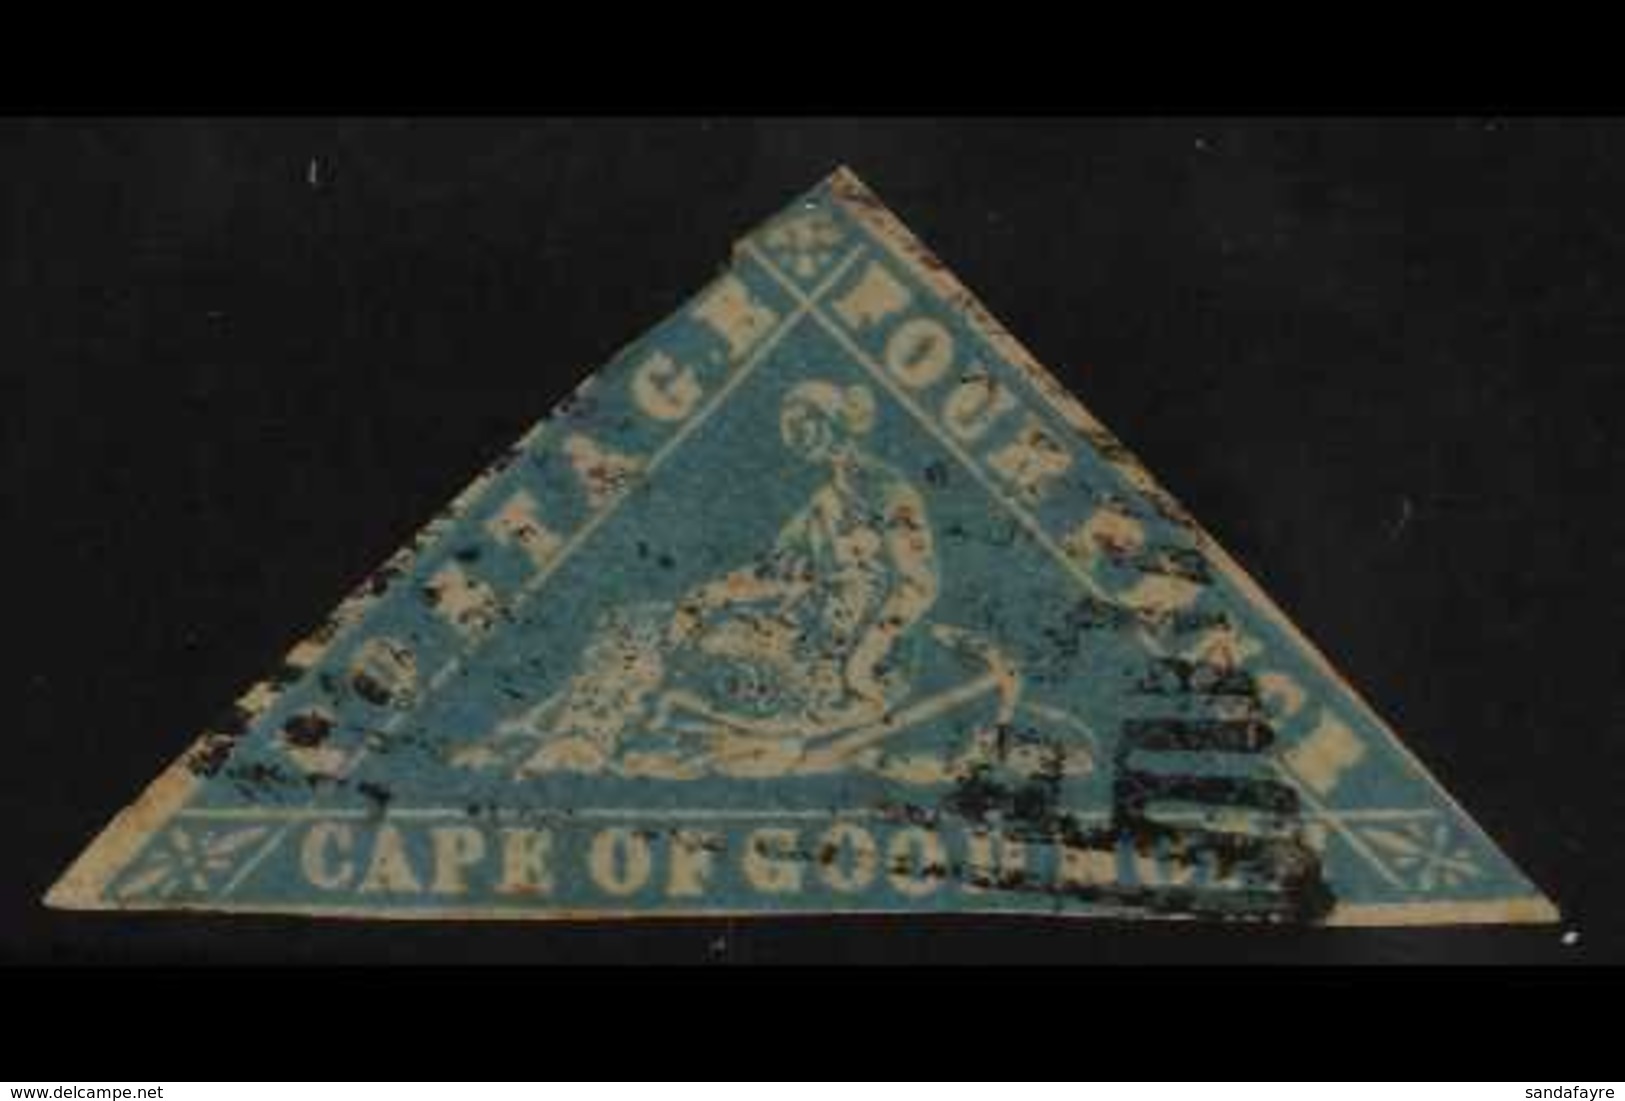 CAPE OF GOOD HOPE  1861 4d Pale Milky Blue "Wood-block" Issue, SG 14, Good To Fine Used, Margin Slightly Cut Into At Lef - Non Classés